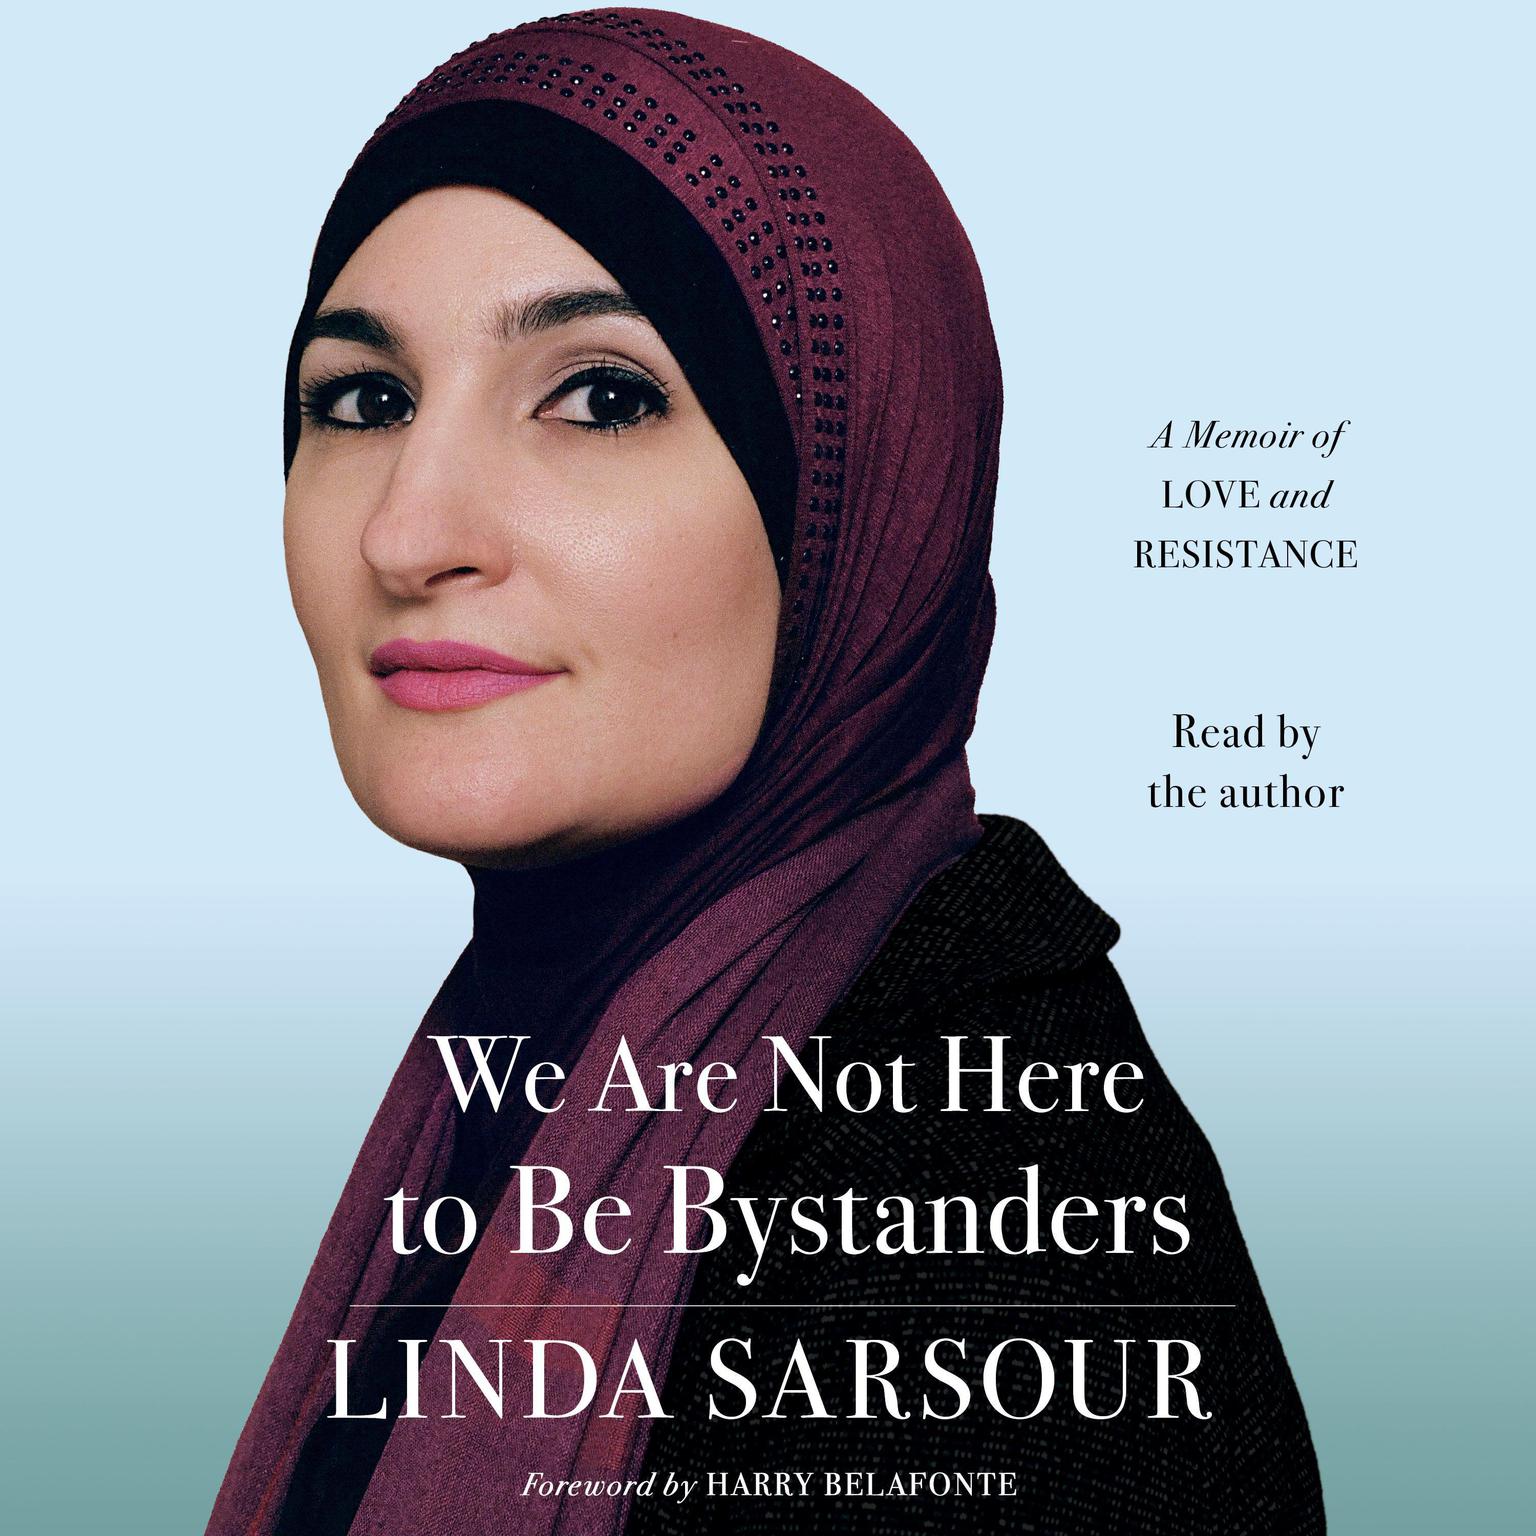 We Are Not Here to Be Bystanders: A Memoir of Love and Resistance Audiobook, by Linda Sarsour